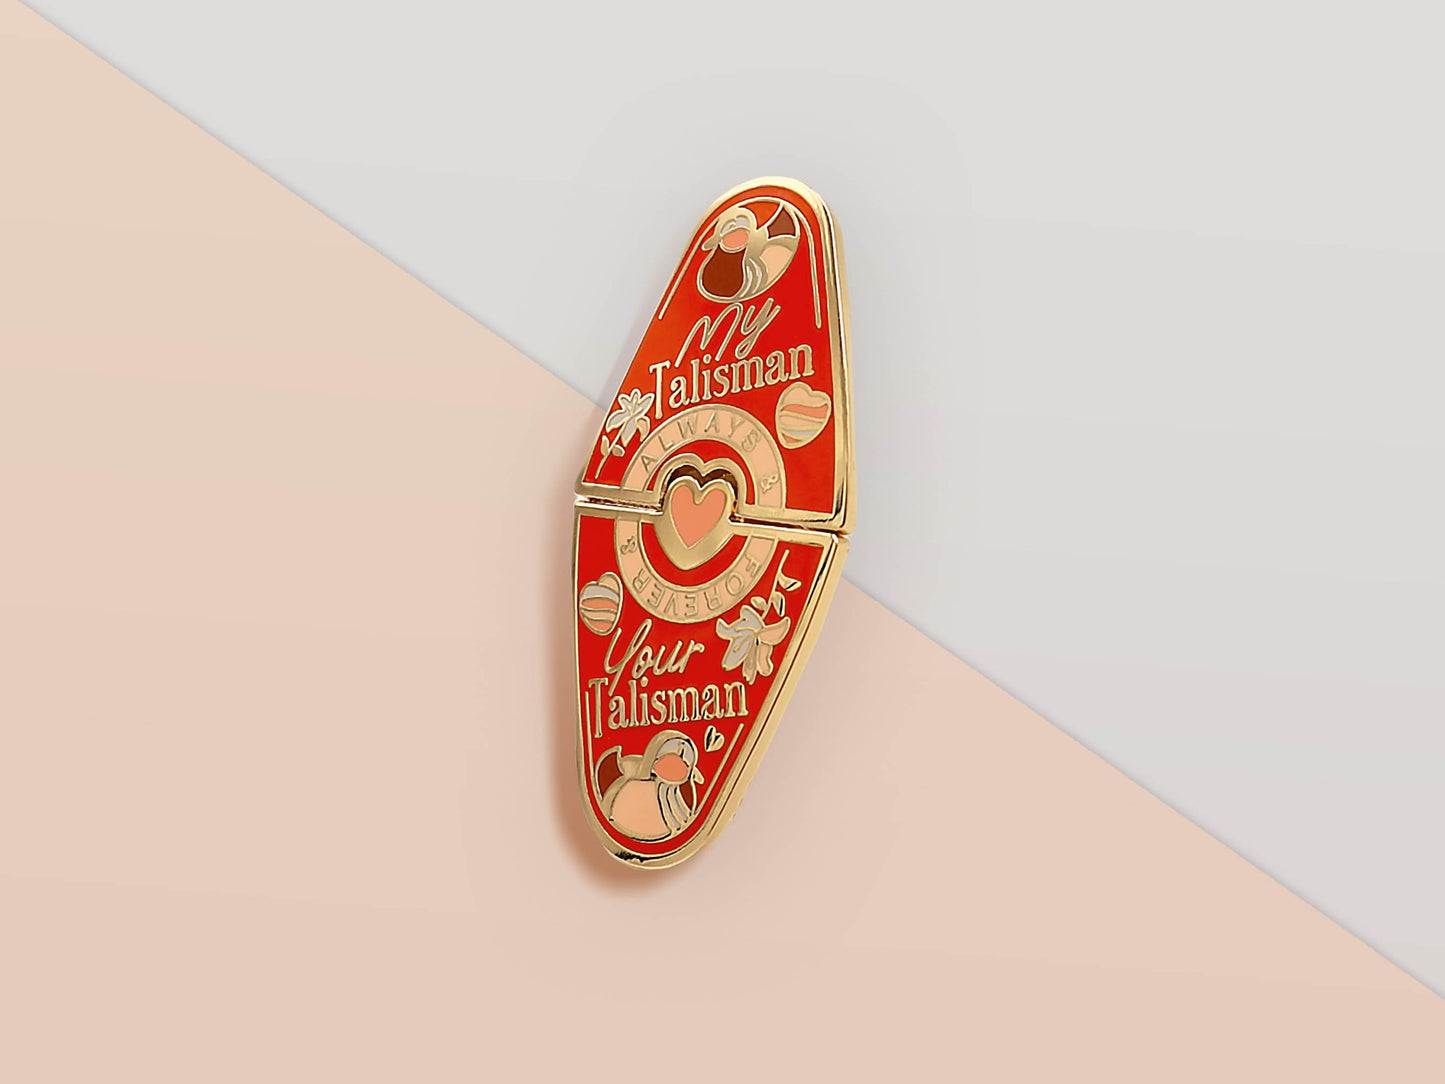 Gold Enamel Talisman Pin with red design and the words Couple's Talisman, Always & Forever. The pins design includes a hearts, ducks, as well as flowers and crystals.